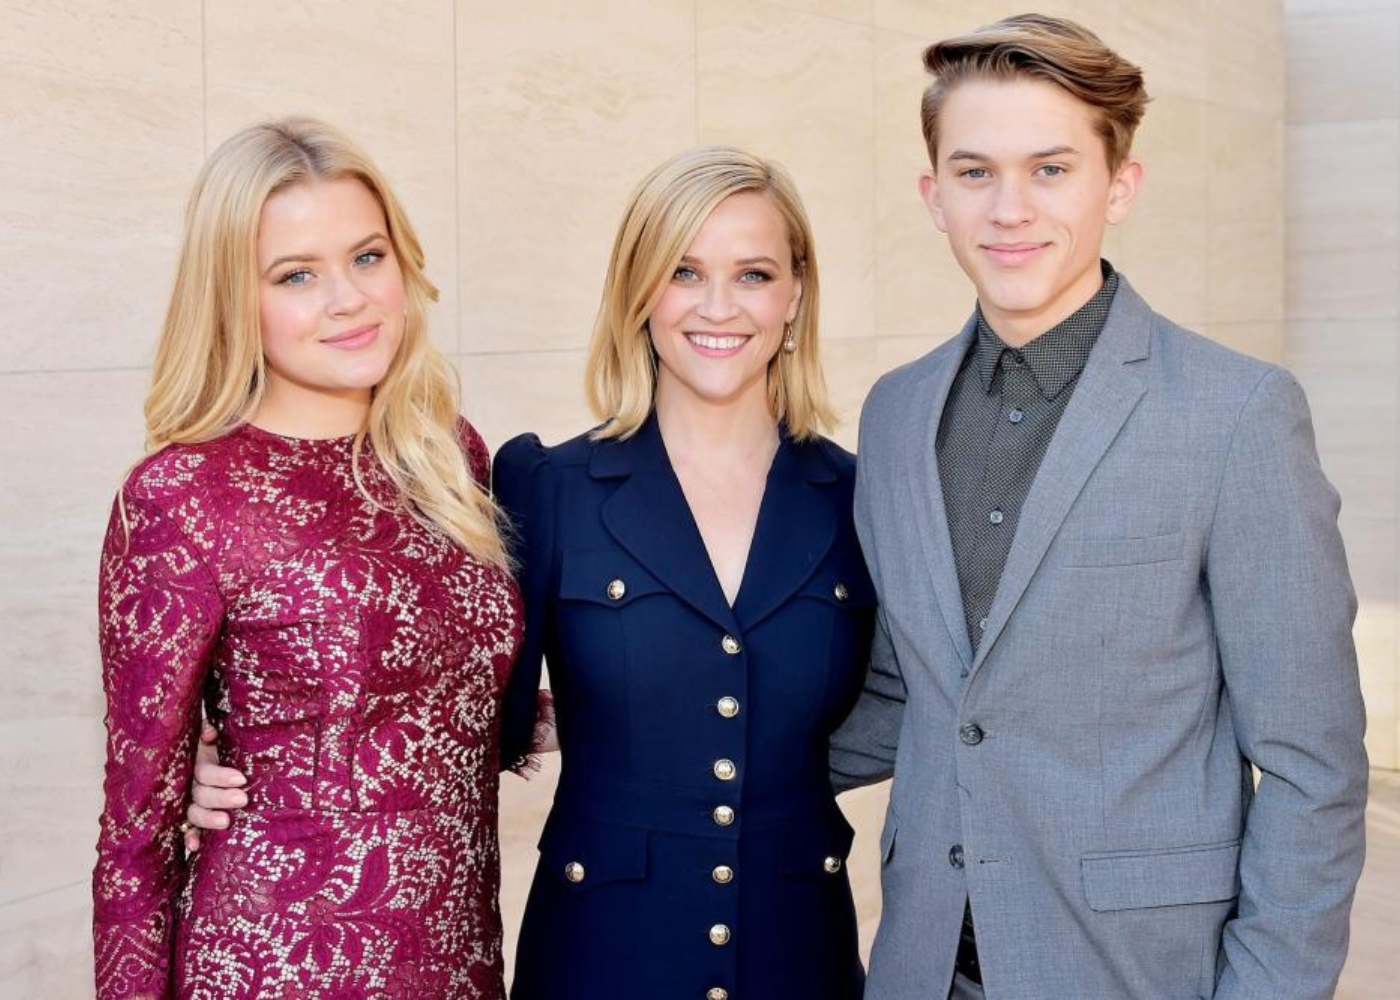 Reese Witherspoon Says Son Deacon ‘Inspires Me Everyday’ As They Pose For Sweet Sunset Selfie